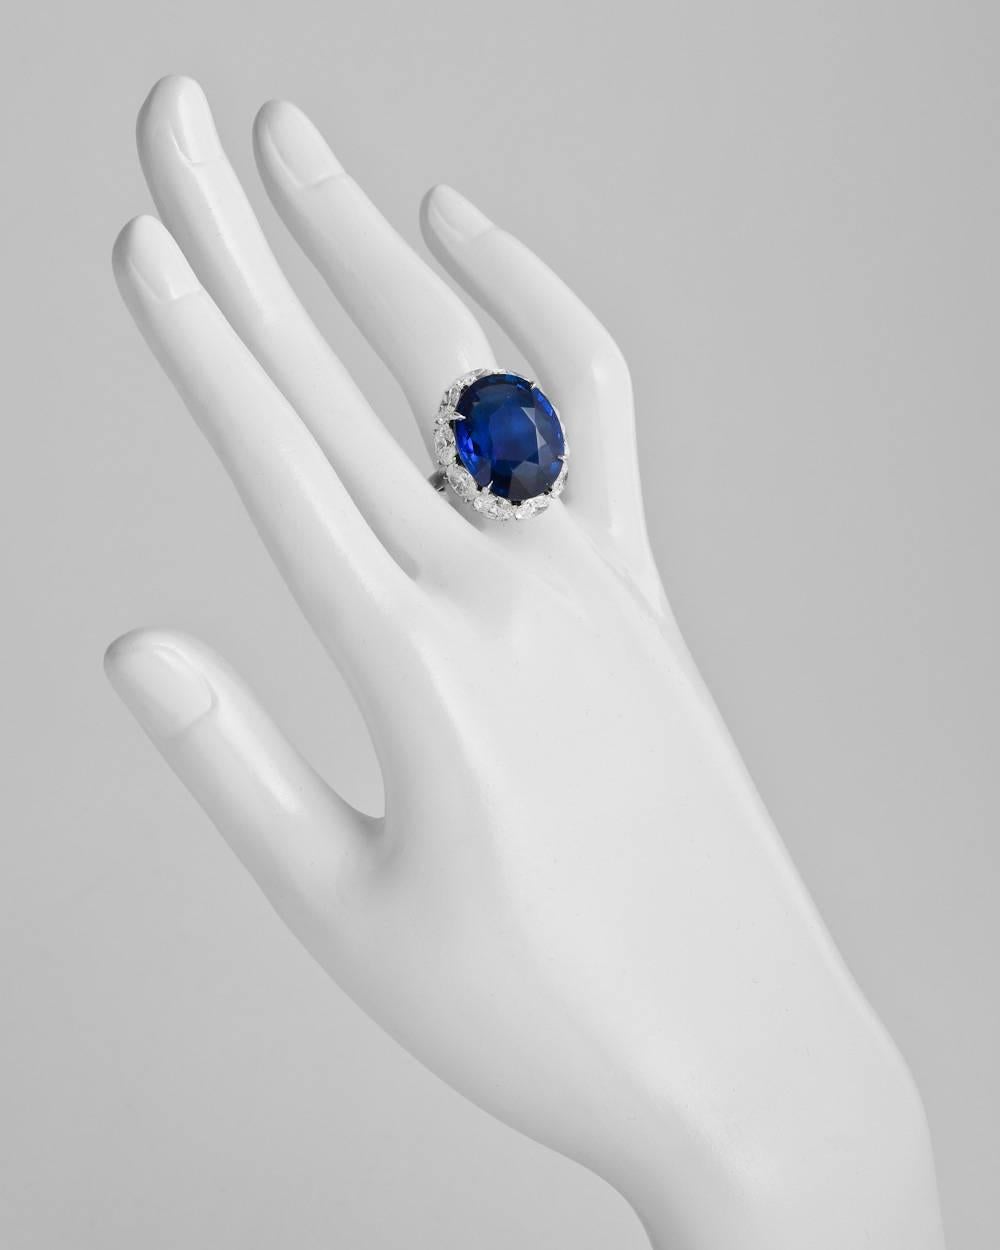 Ceylon sapphire ring, showcasing a natural no-heat oval-shaped sapphire weighing 22.22 carats, framed by ten colorless oval-shaped diamonds weighing approximately 4.10 total carats (F-color, VVS-VS clarity), in platinum. Accompanied by the AGL